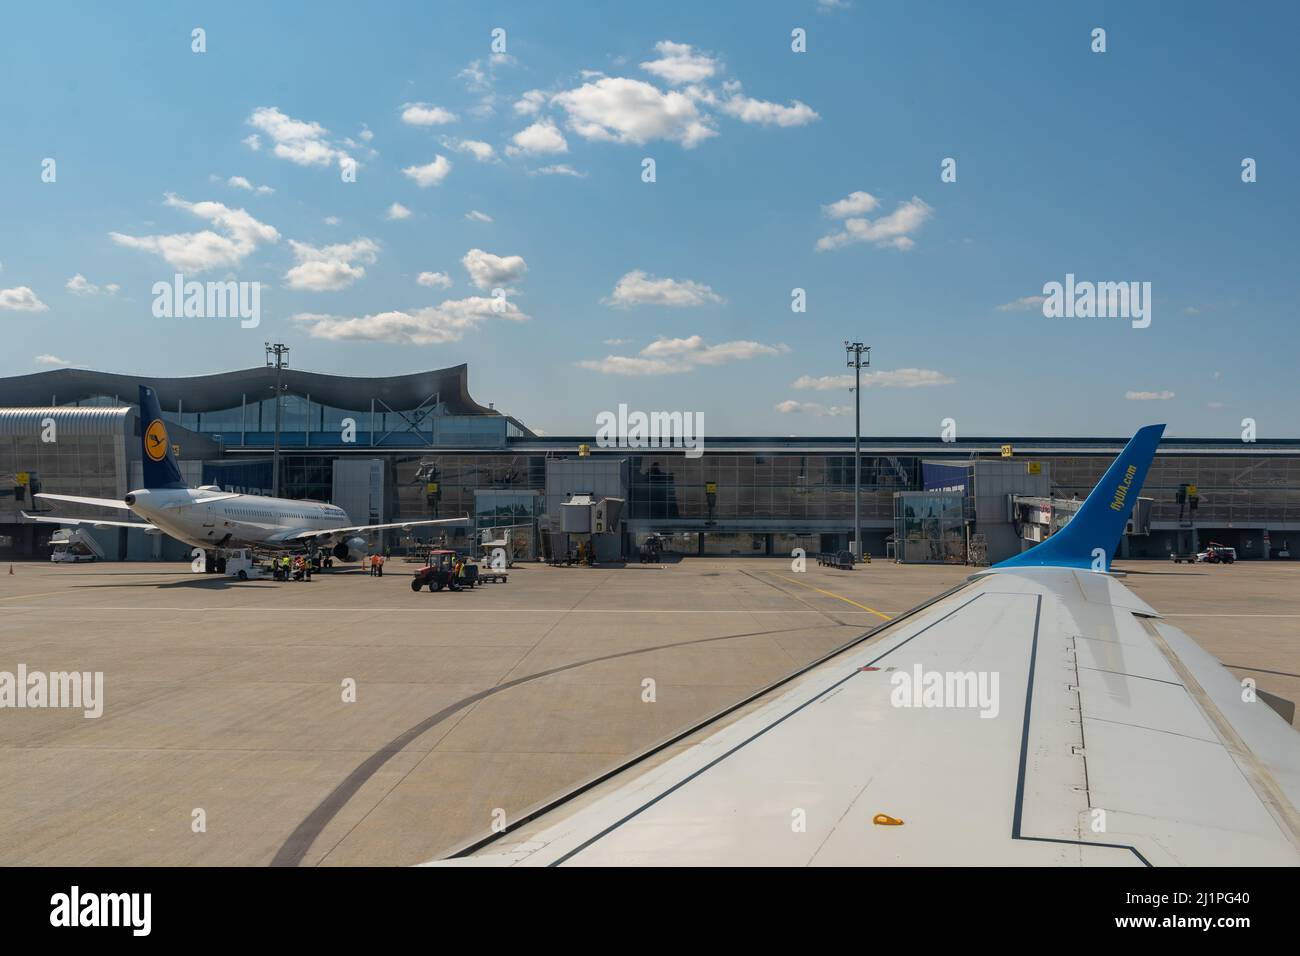 Boryspil International Airport. Terminal D and aircraft plane parking. Airplane on the apron. Flights and travel. Kyiv, Ukraine - August 3, 2021. Stock Photo